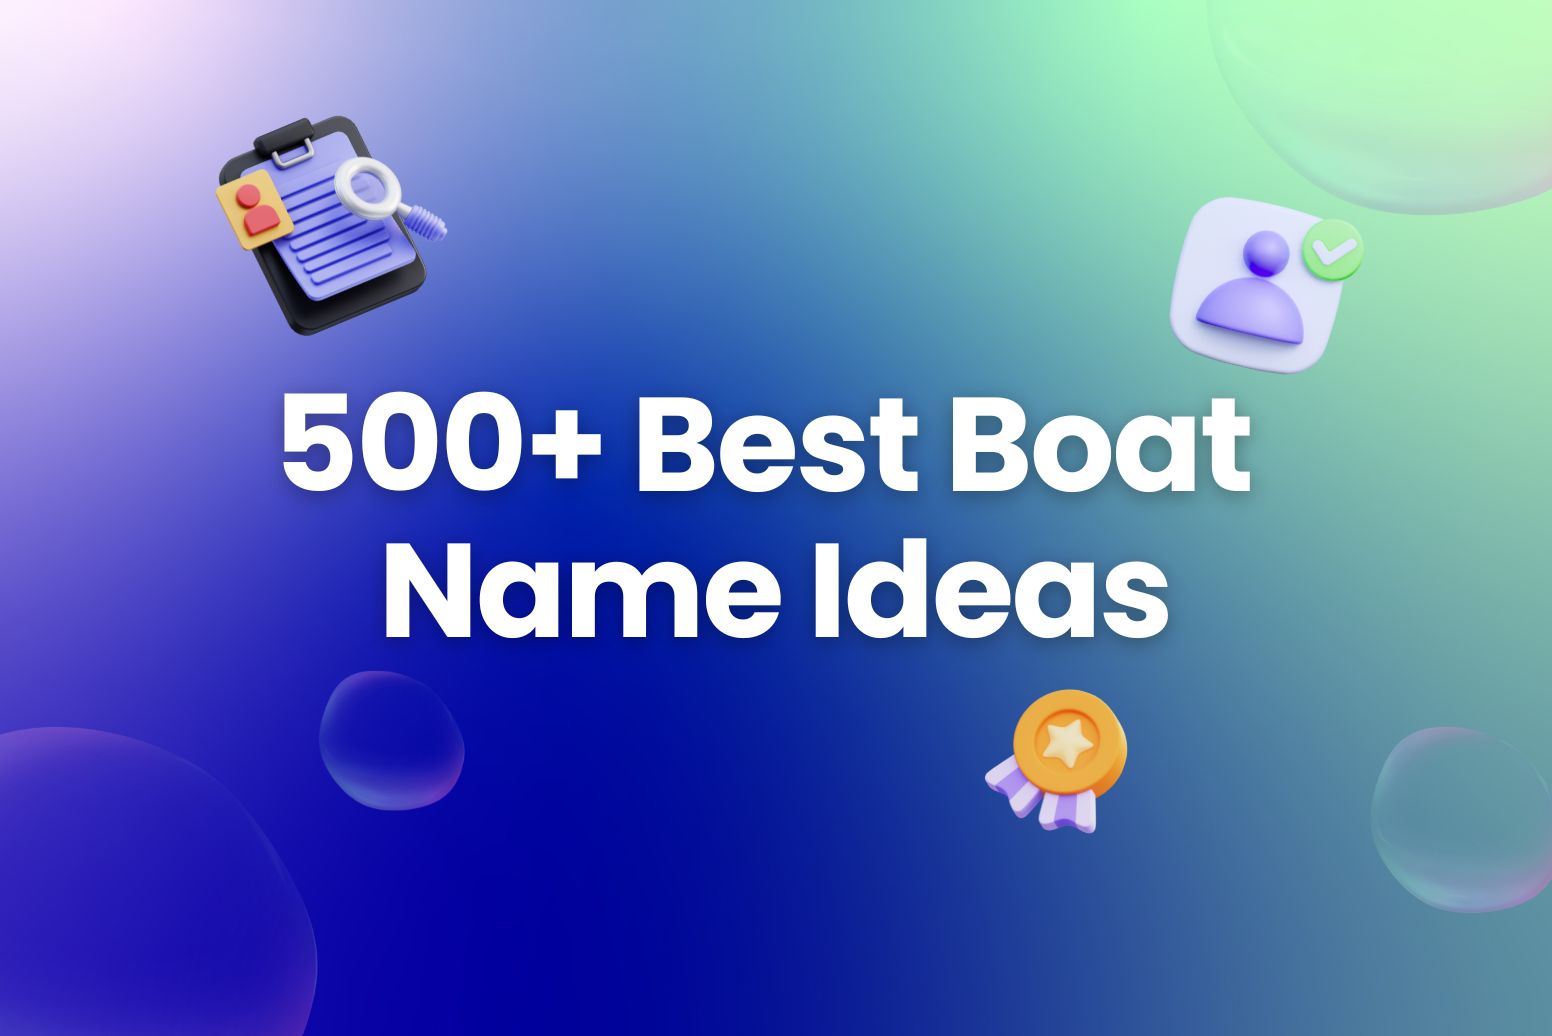 500+ Best Boat Name Ideas